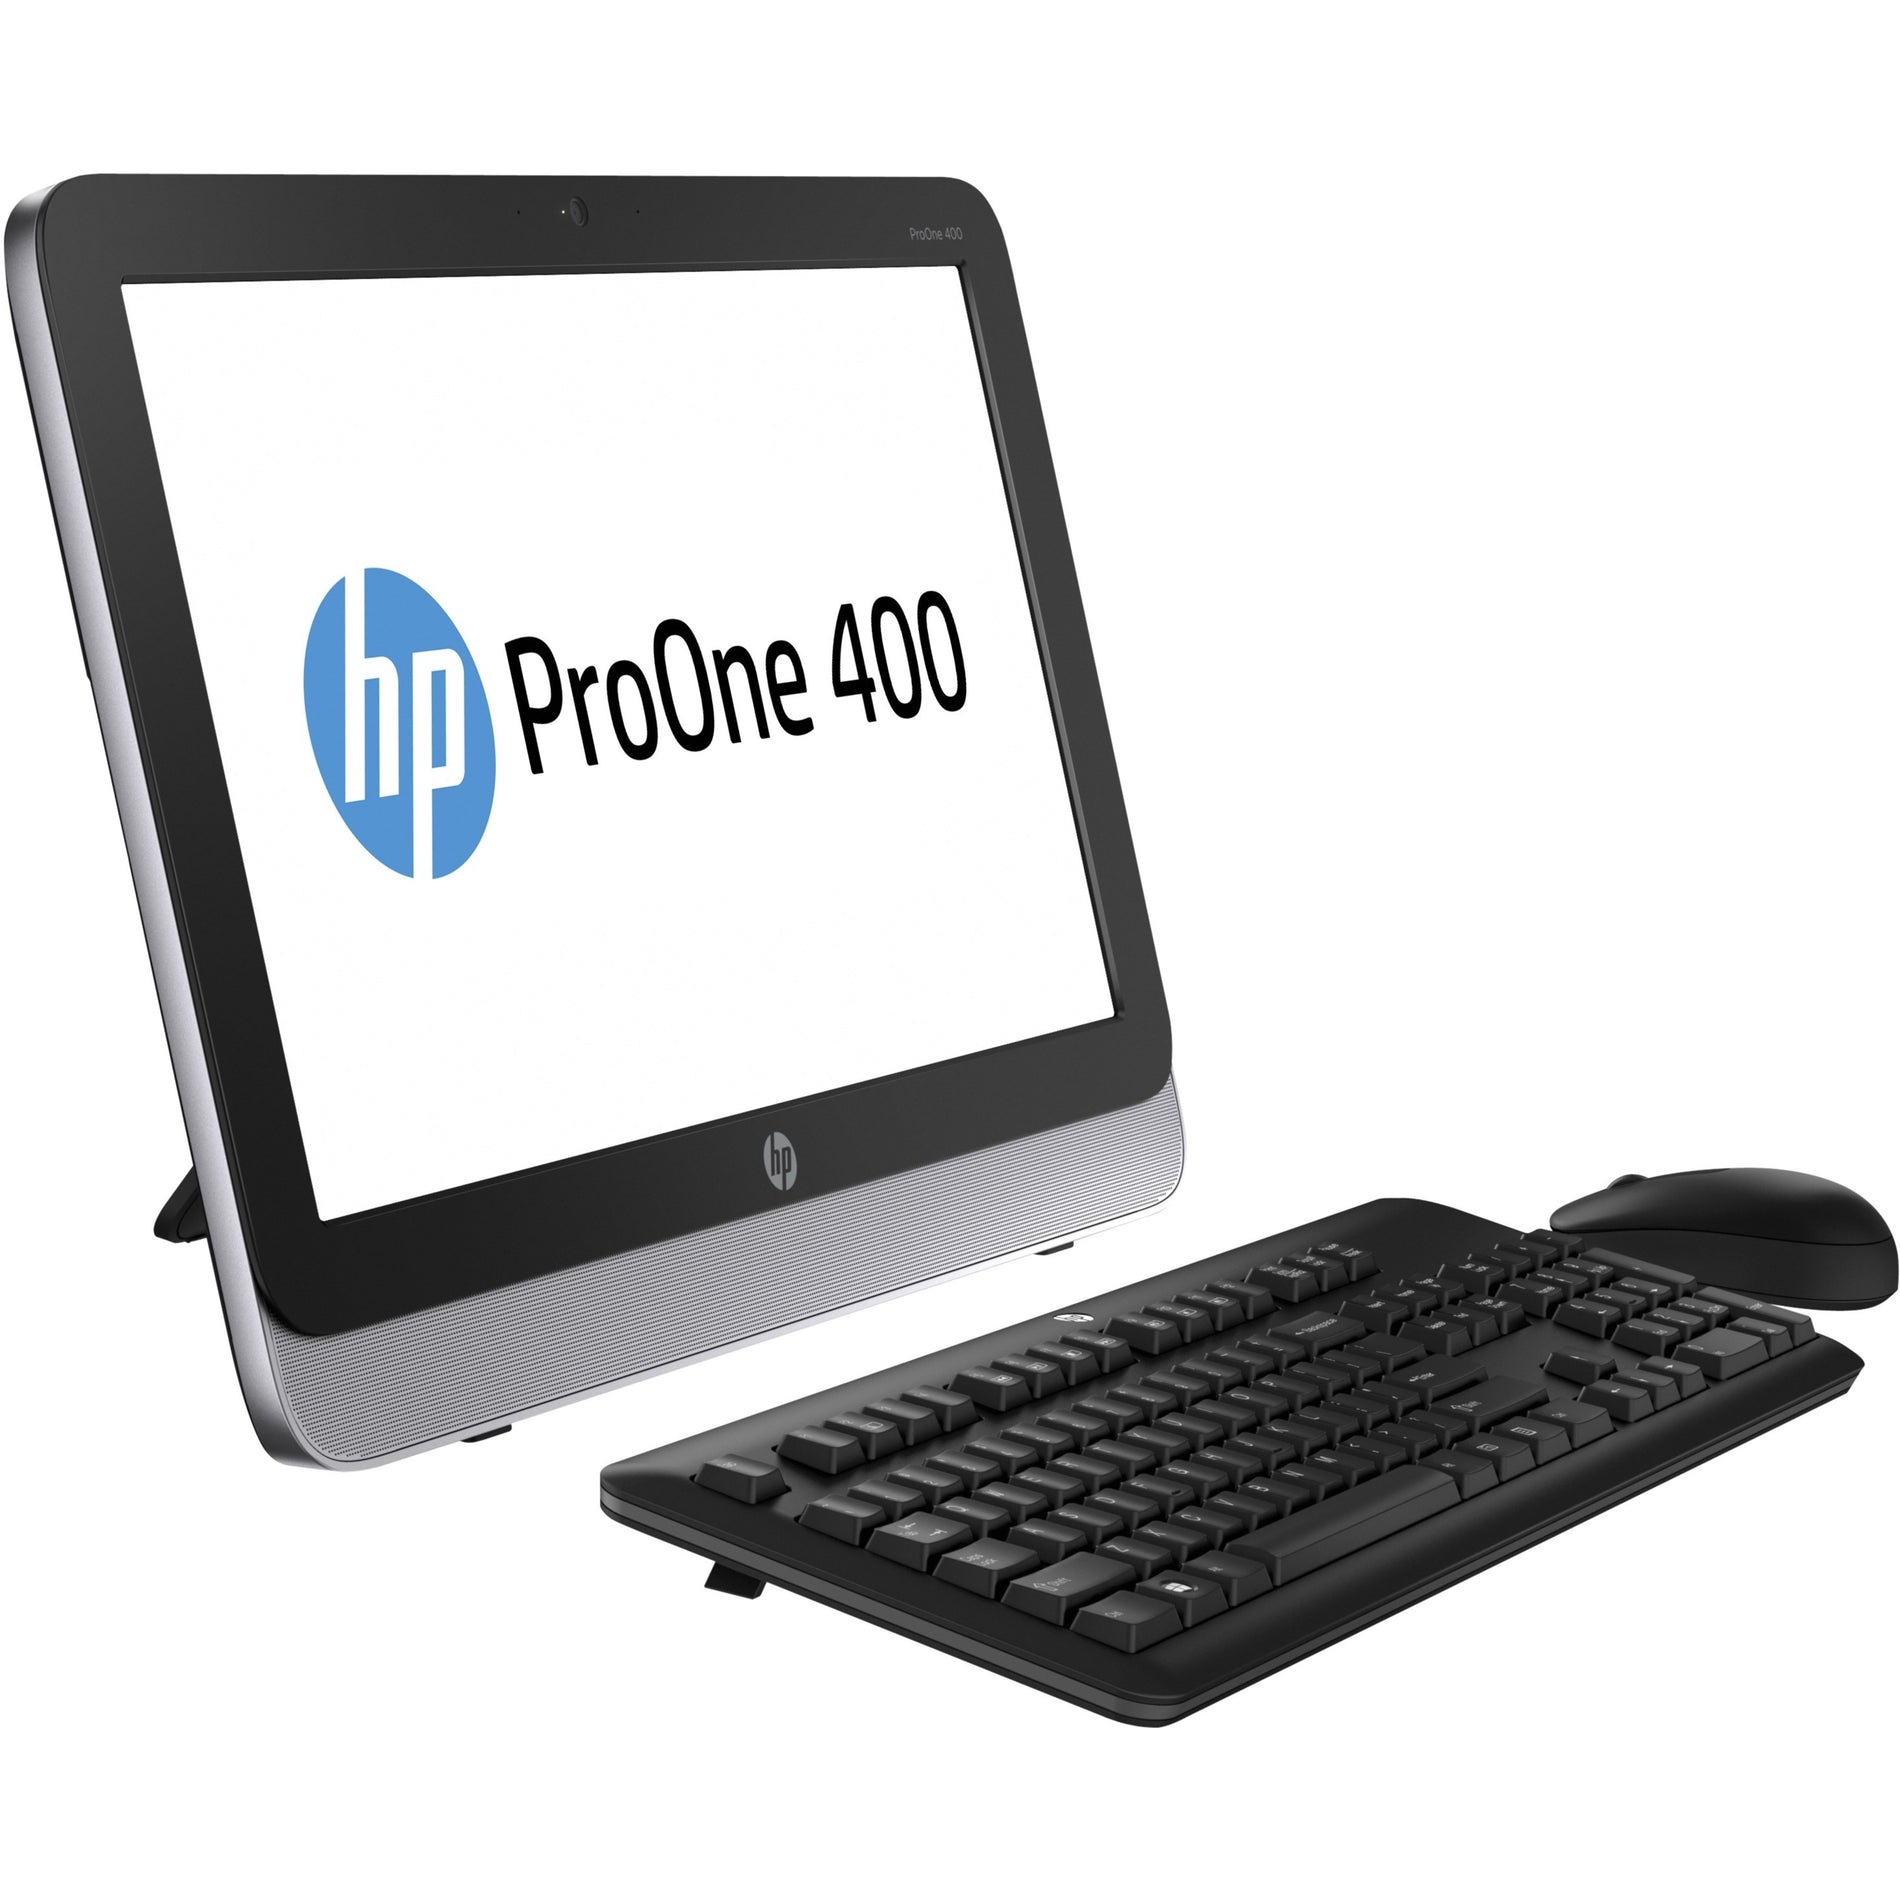 HP ProOne 400 G1 19.5-inch Non-Touch All-in-One PC, Windows 7 Professional, 4GB RAM, 500GB HDD